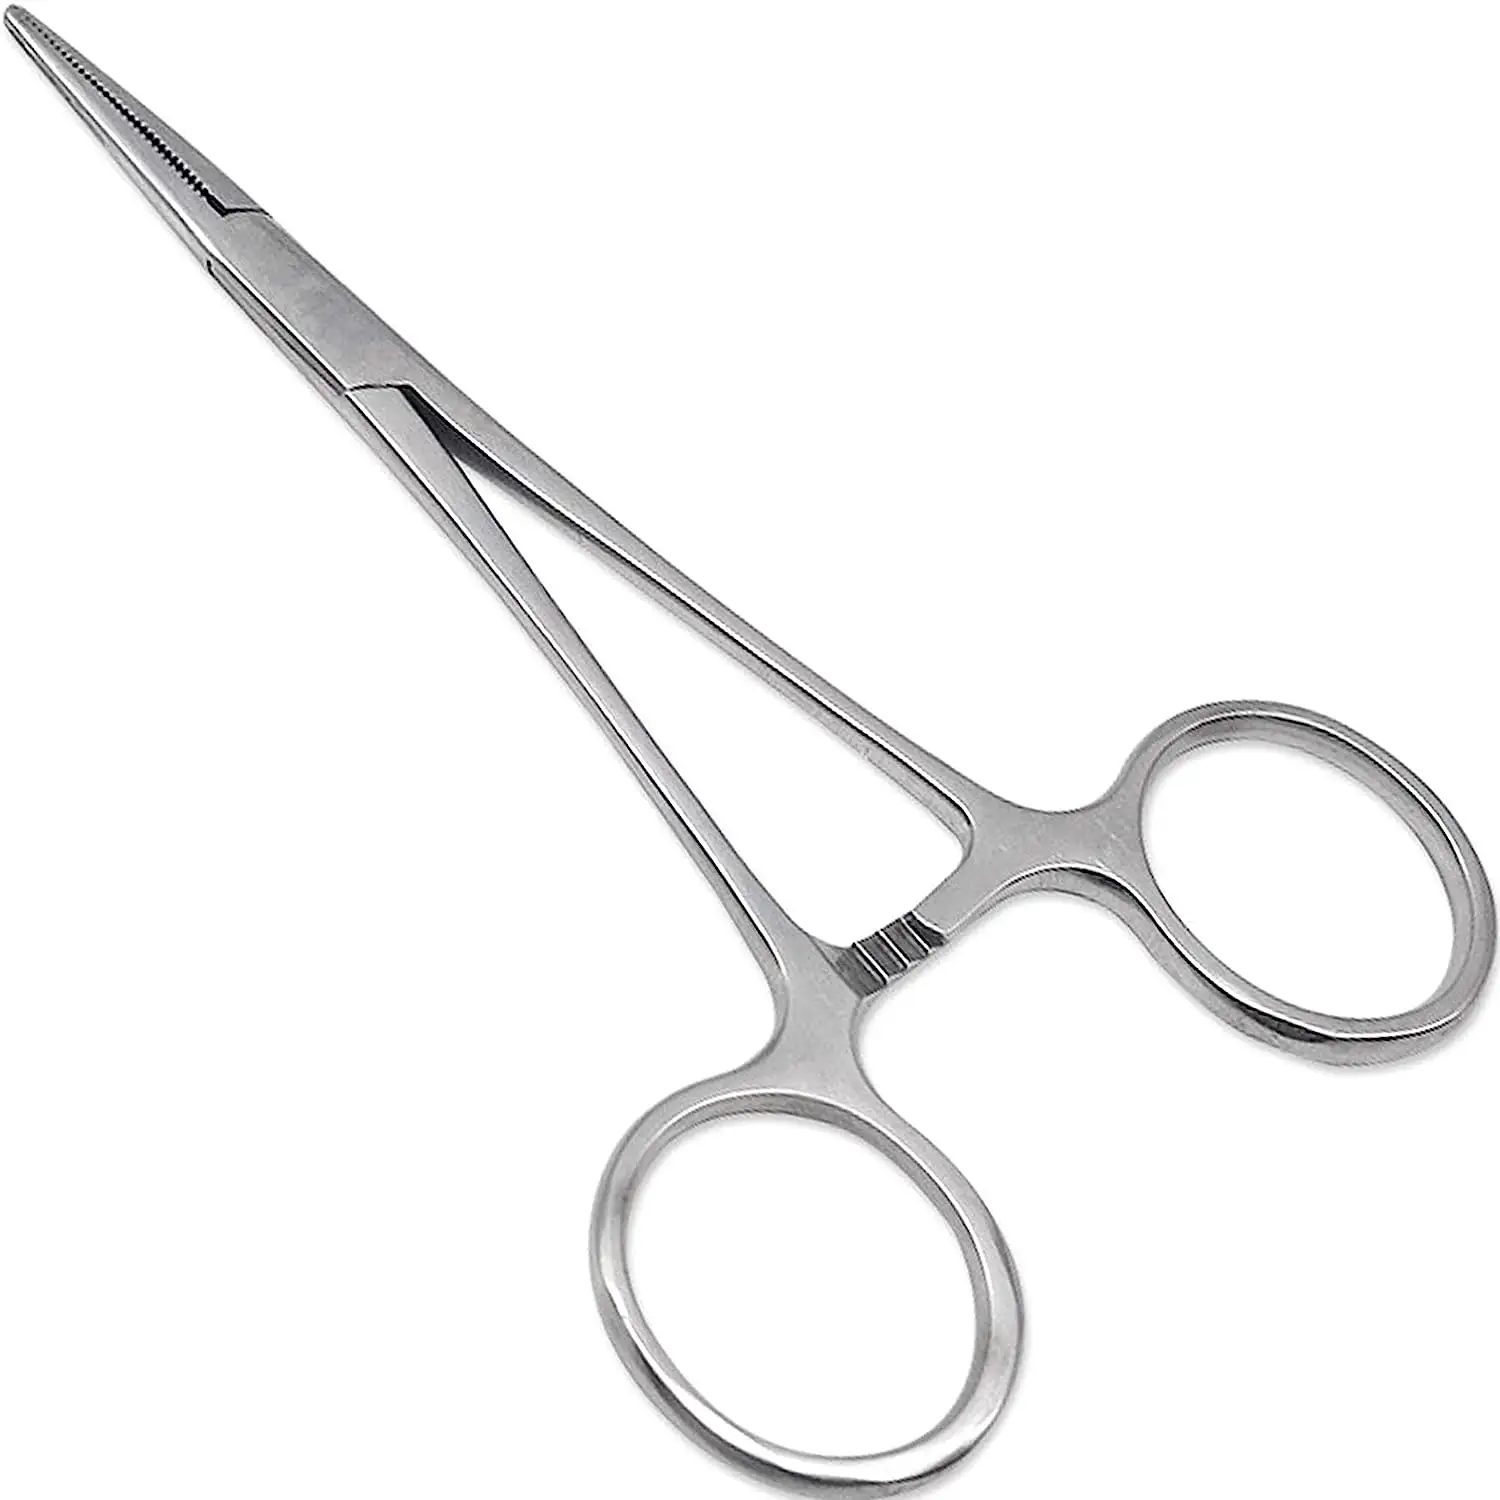 Precise Kelly Hemostat Forceps Locking Tweezers Clamp, Silver, 5.5 Inches, Straight and Curved Stainless Steel